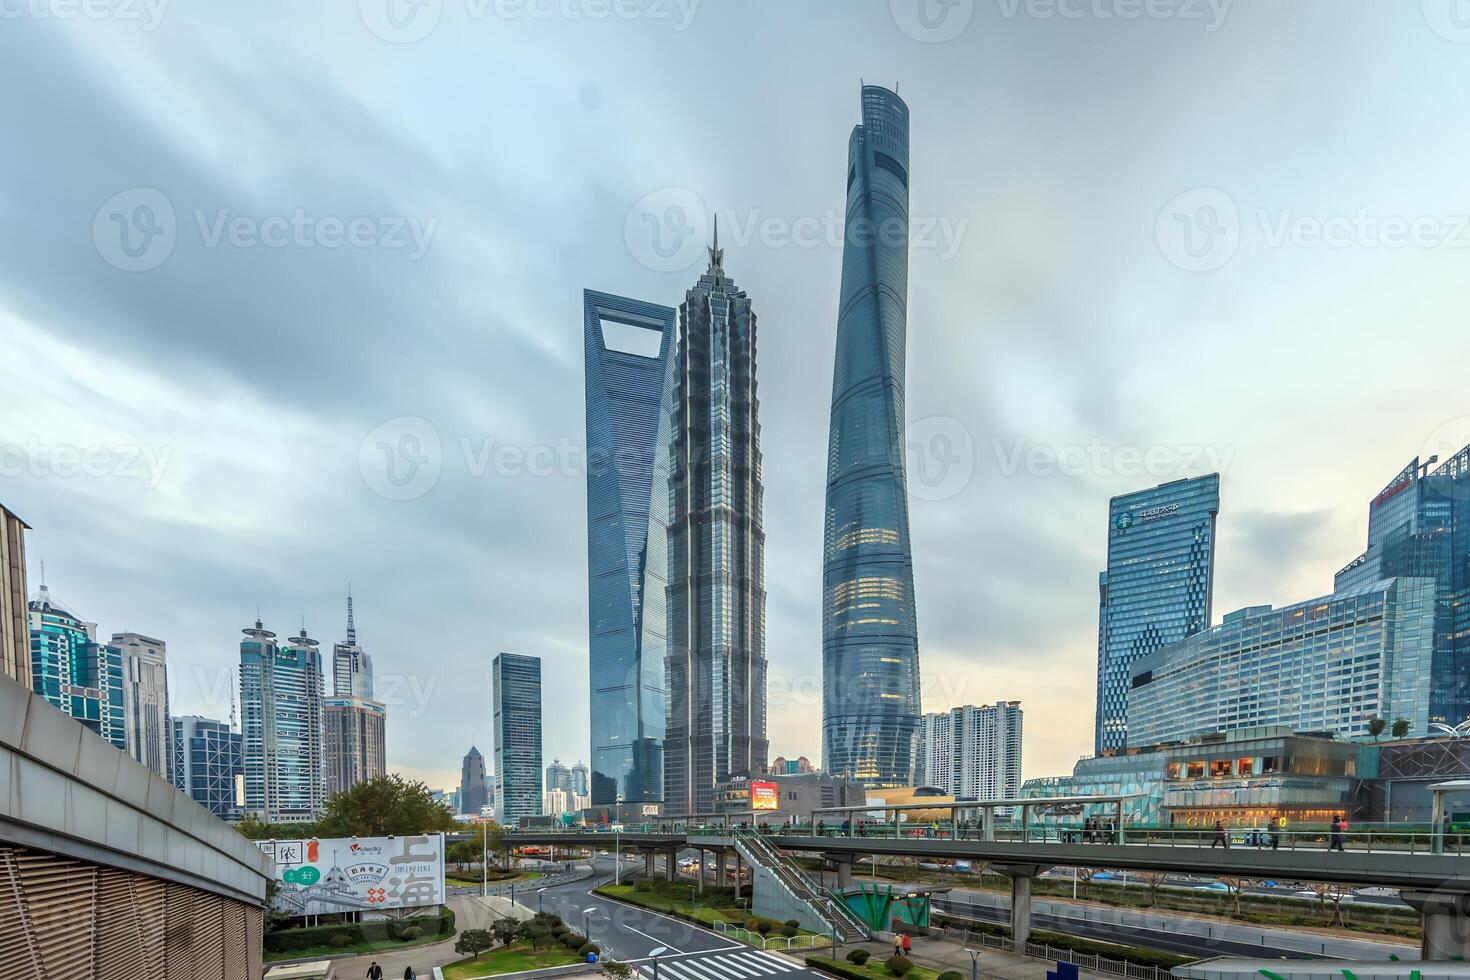 Picture of the skyline of Shanghai's Pudong district photo